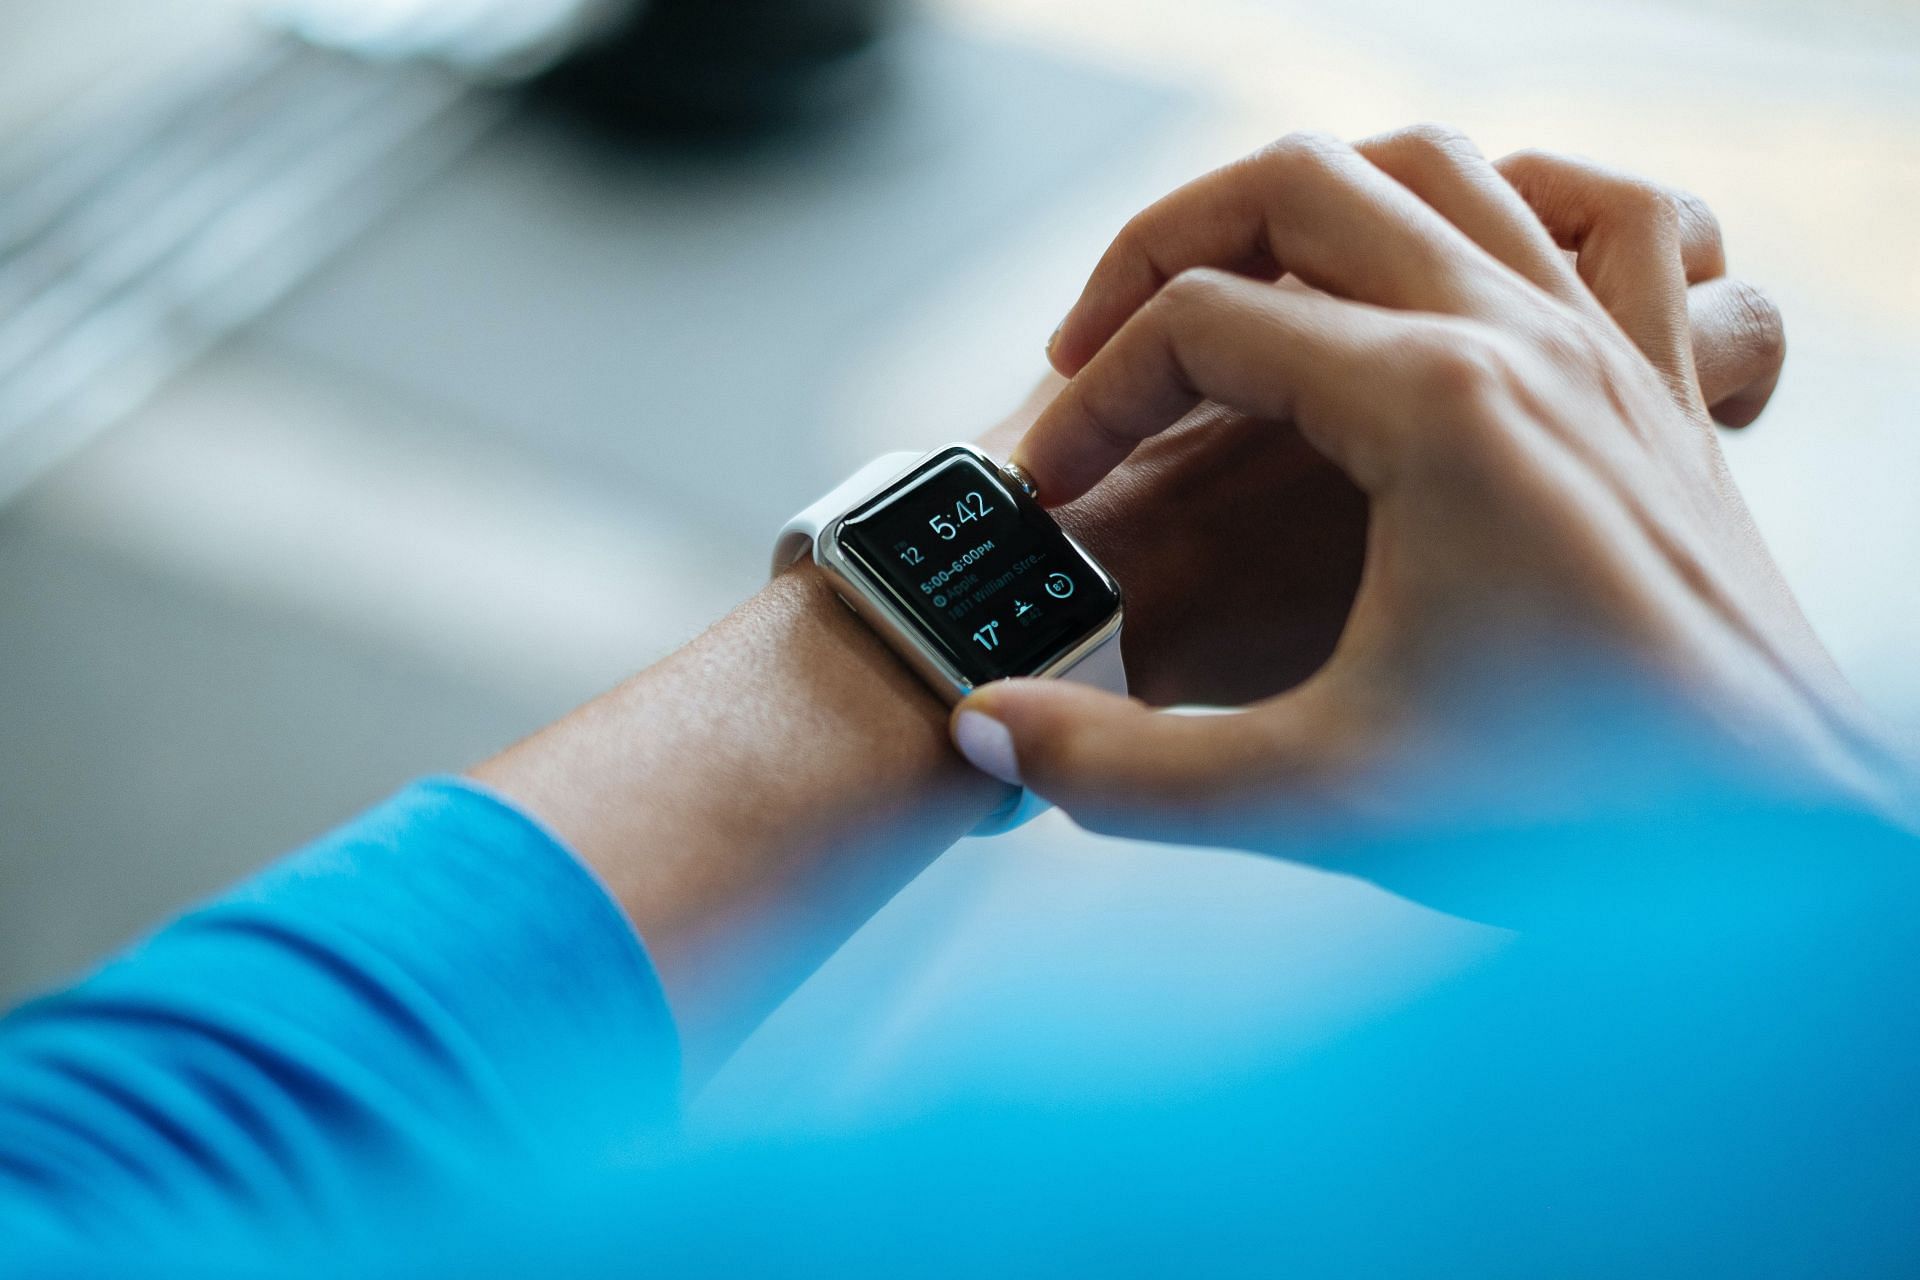 Smartwatch can help you to track and trace your daily activity. (Image via Unsplash / Luke Chesser)